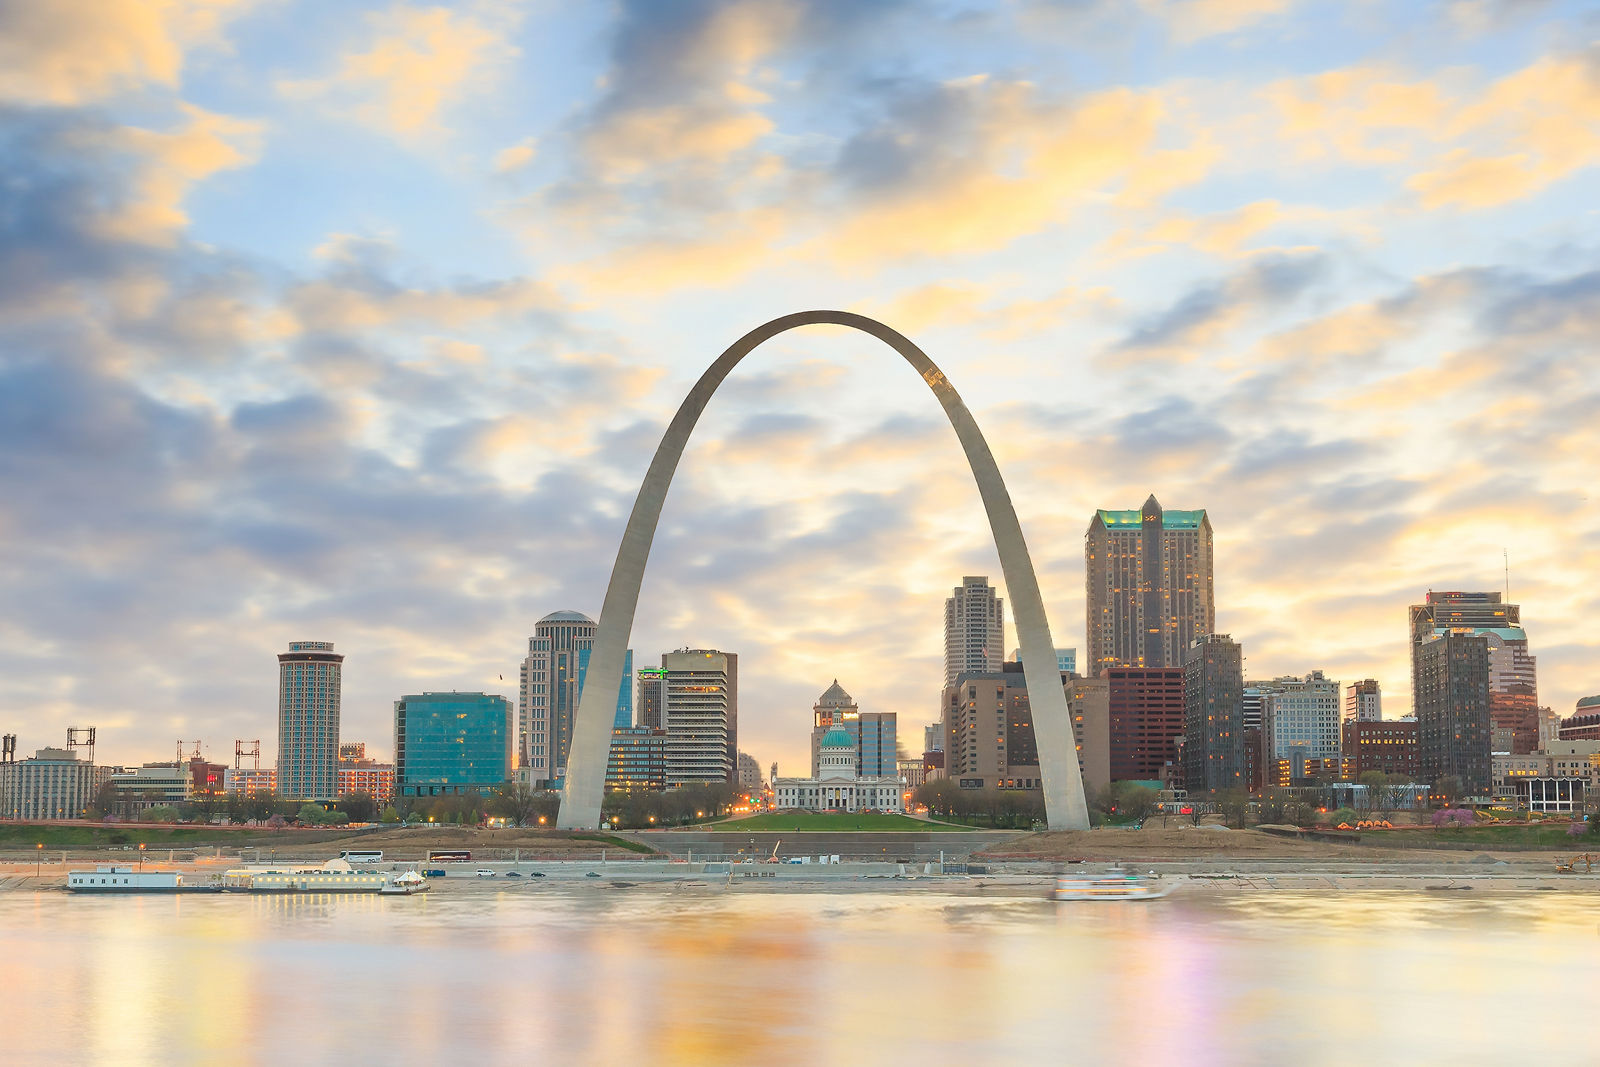 St. Louis, Missouri, is the gateway to the west. It's also No. 16 on Terminix's list. (Thinkstock)